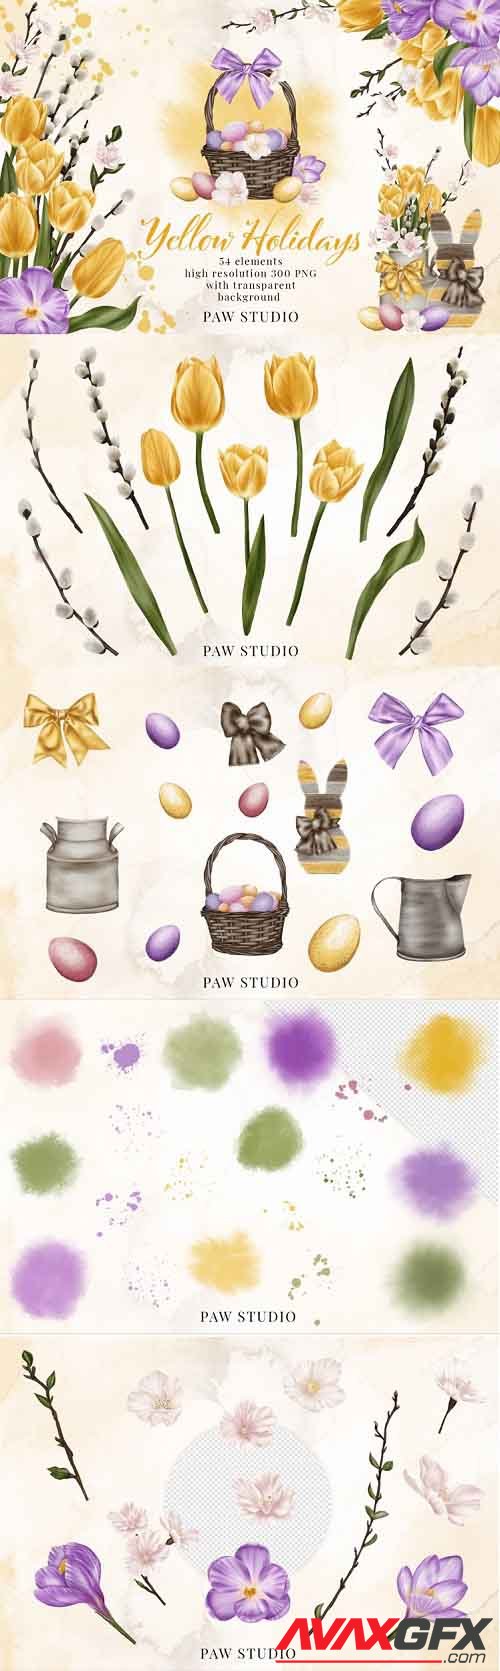 Easter Spring Clipart Yellow Tulips Willow Twigs Basket Eggs - 1187914